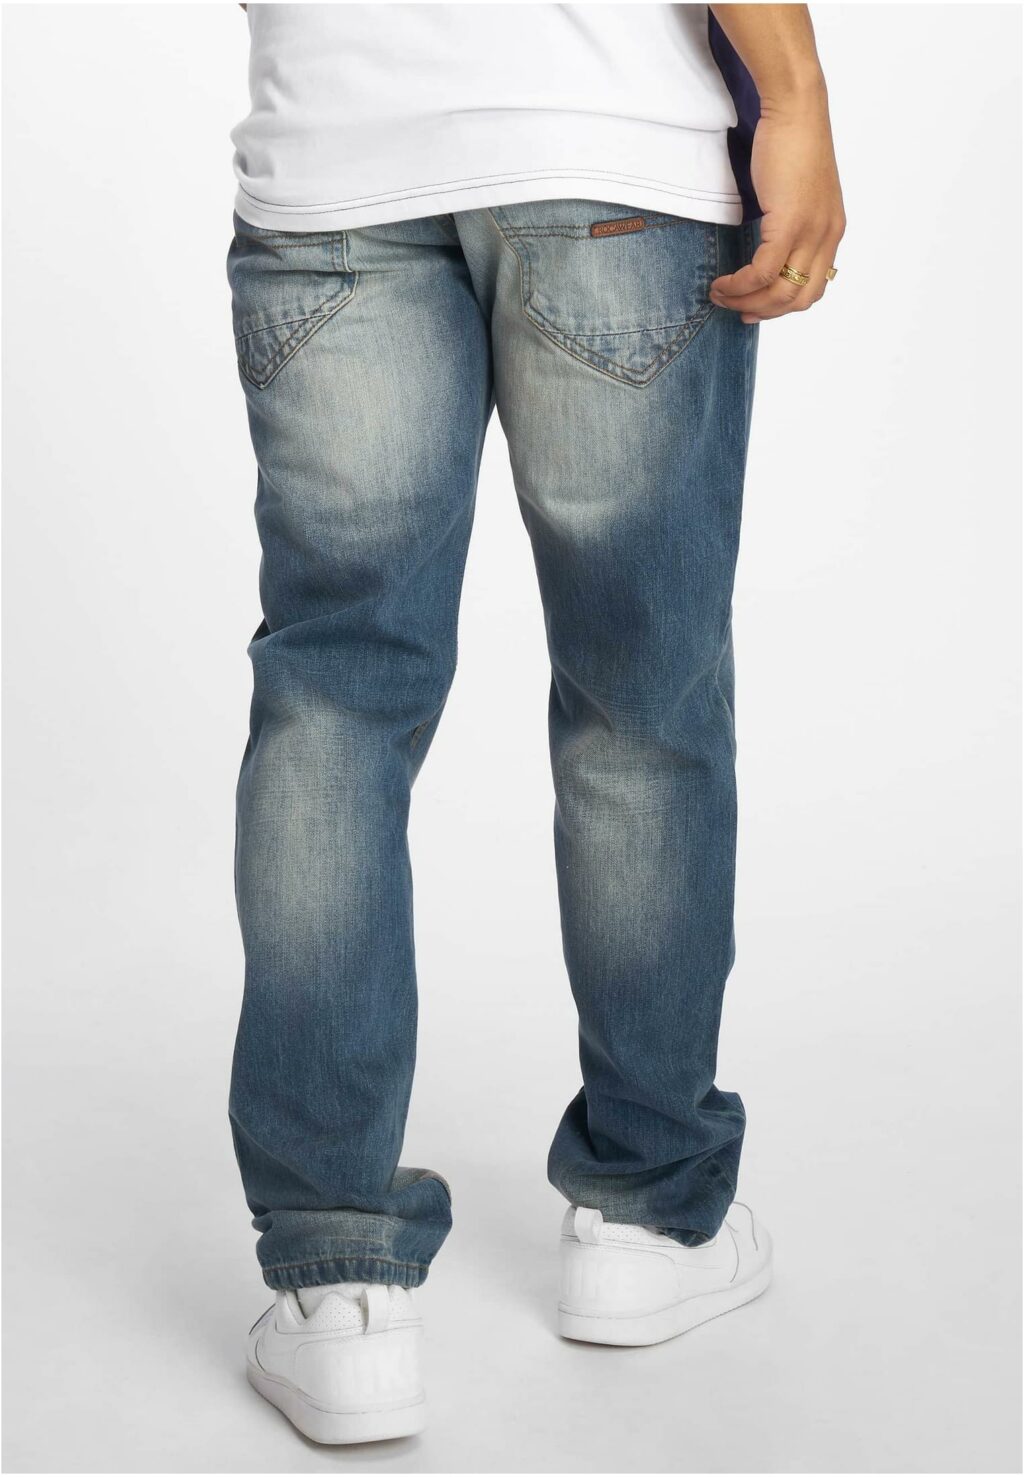 Rocawear TUE Rela/ Fit Jeans light blue washed RWJS016